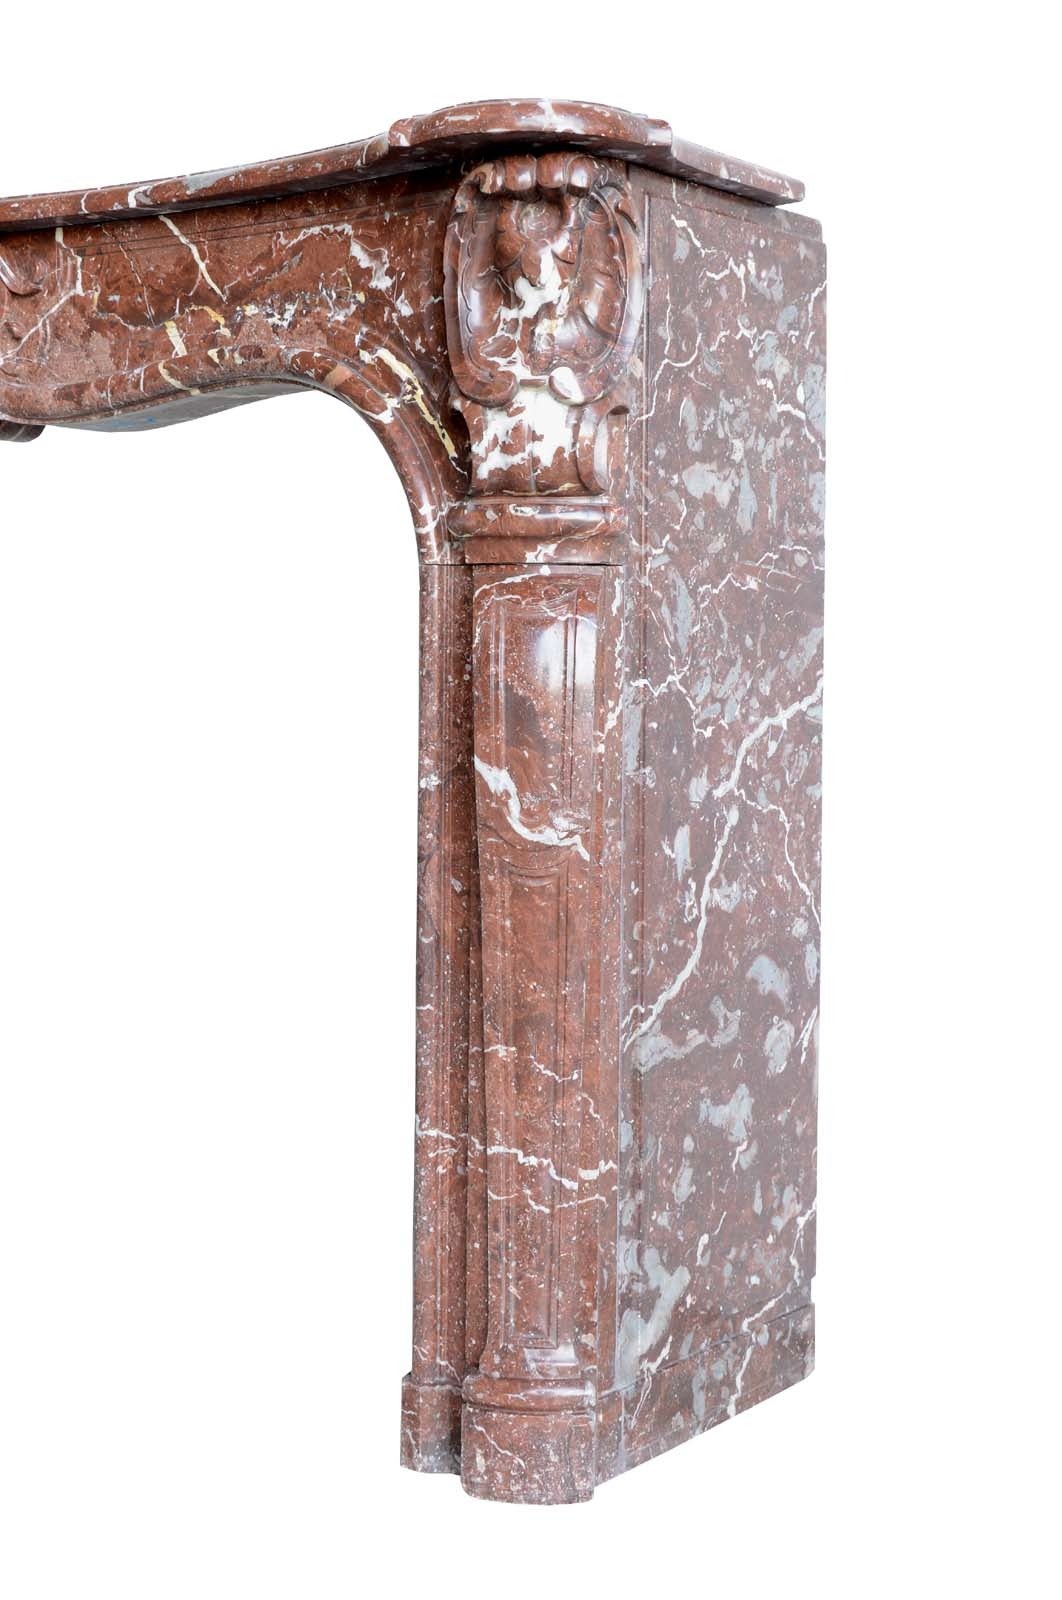 French Louis XV period red marble fireplace dated 18th century. Restored. Origin: Burgundy, Town house in Dijon. Opening: 36 x 50 in.